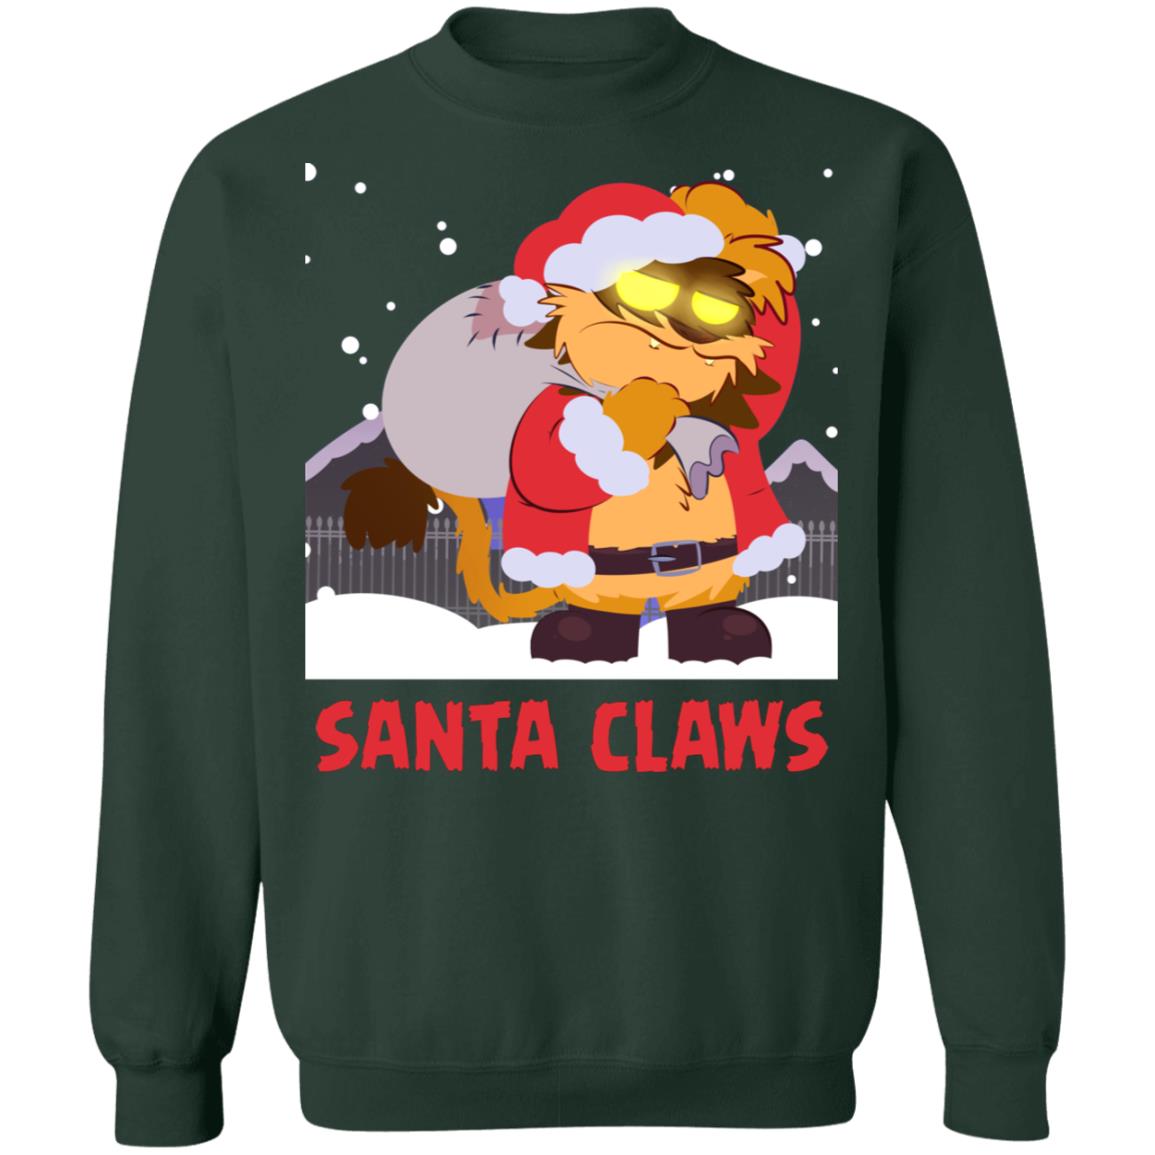 Santa Claws Christmas Sweater Shirt Hooded - Q-Finder Trending Design T ...